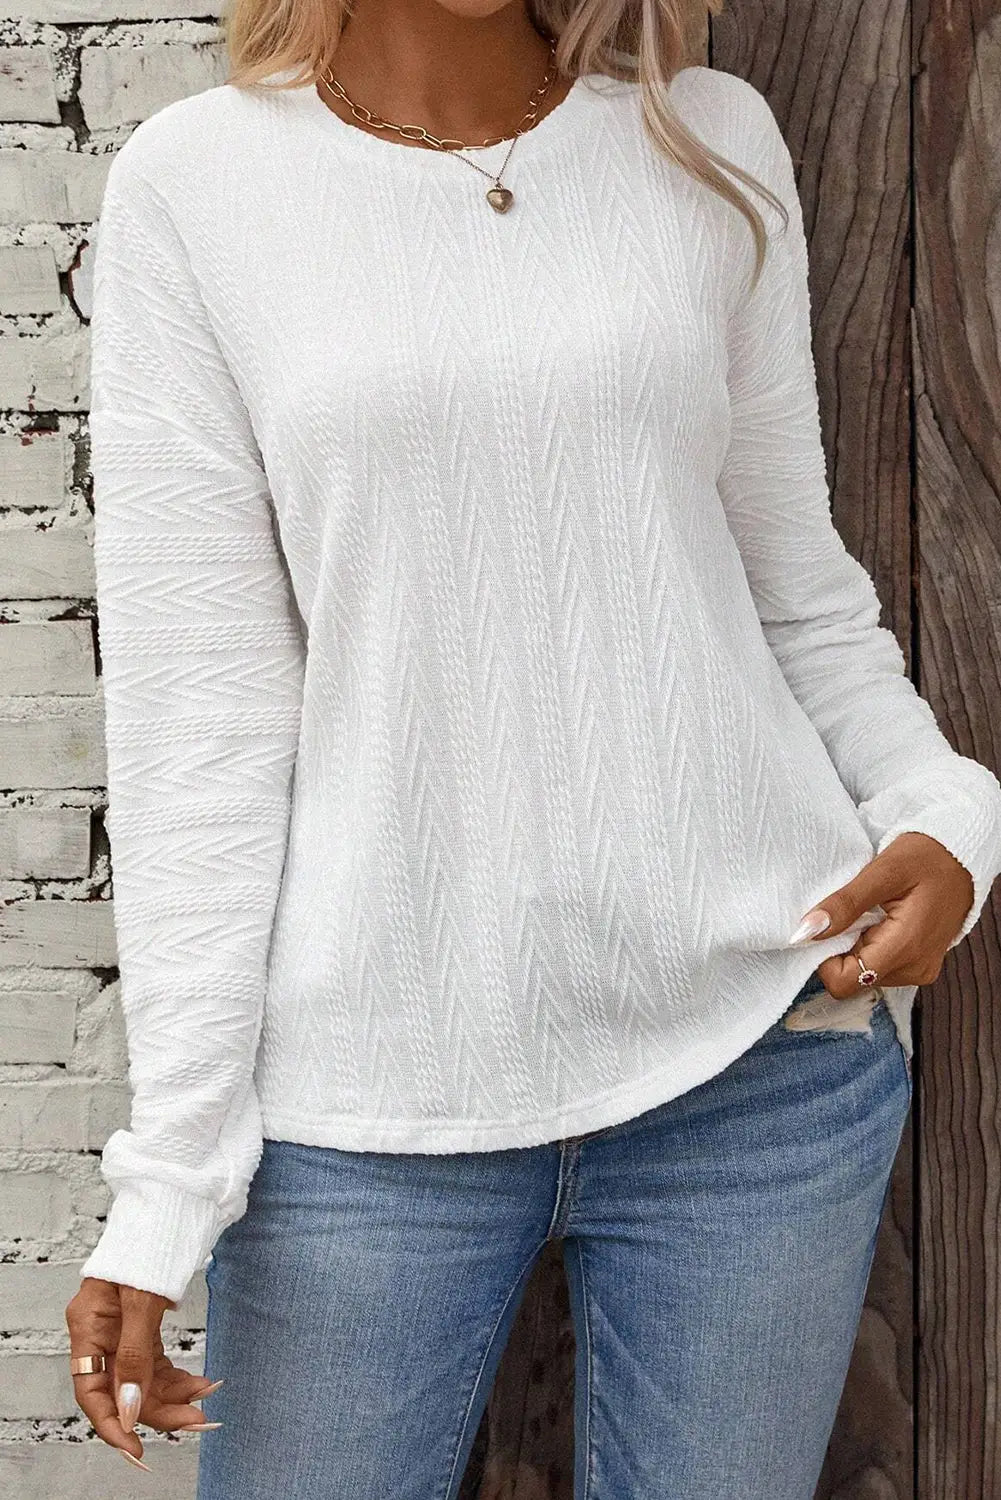 White round neck drop shoulder textured knit top - long sleeve tops